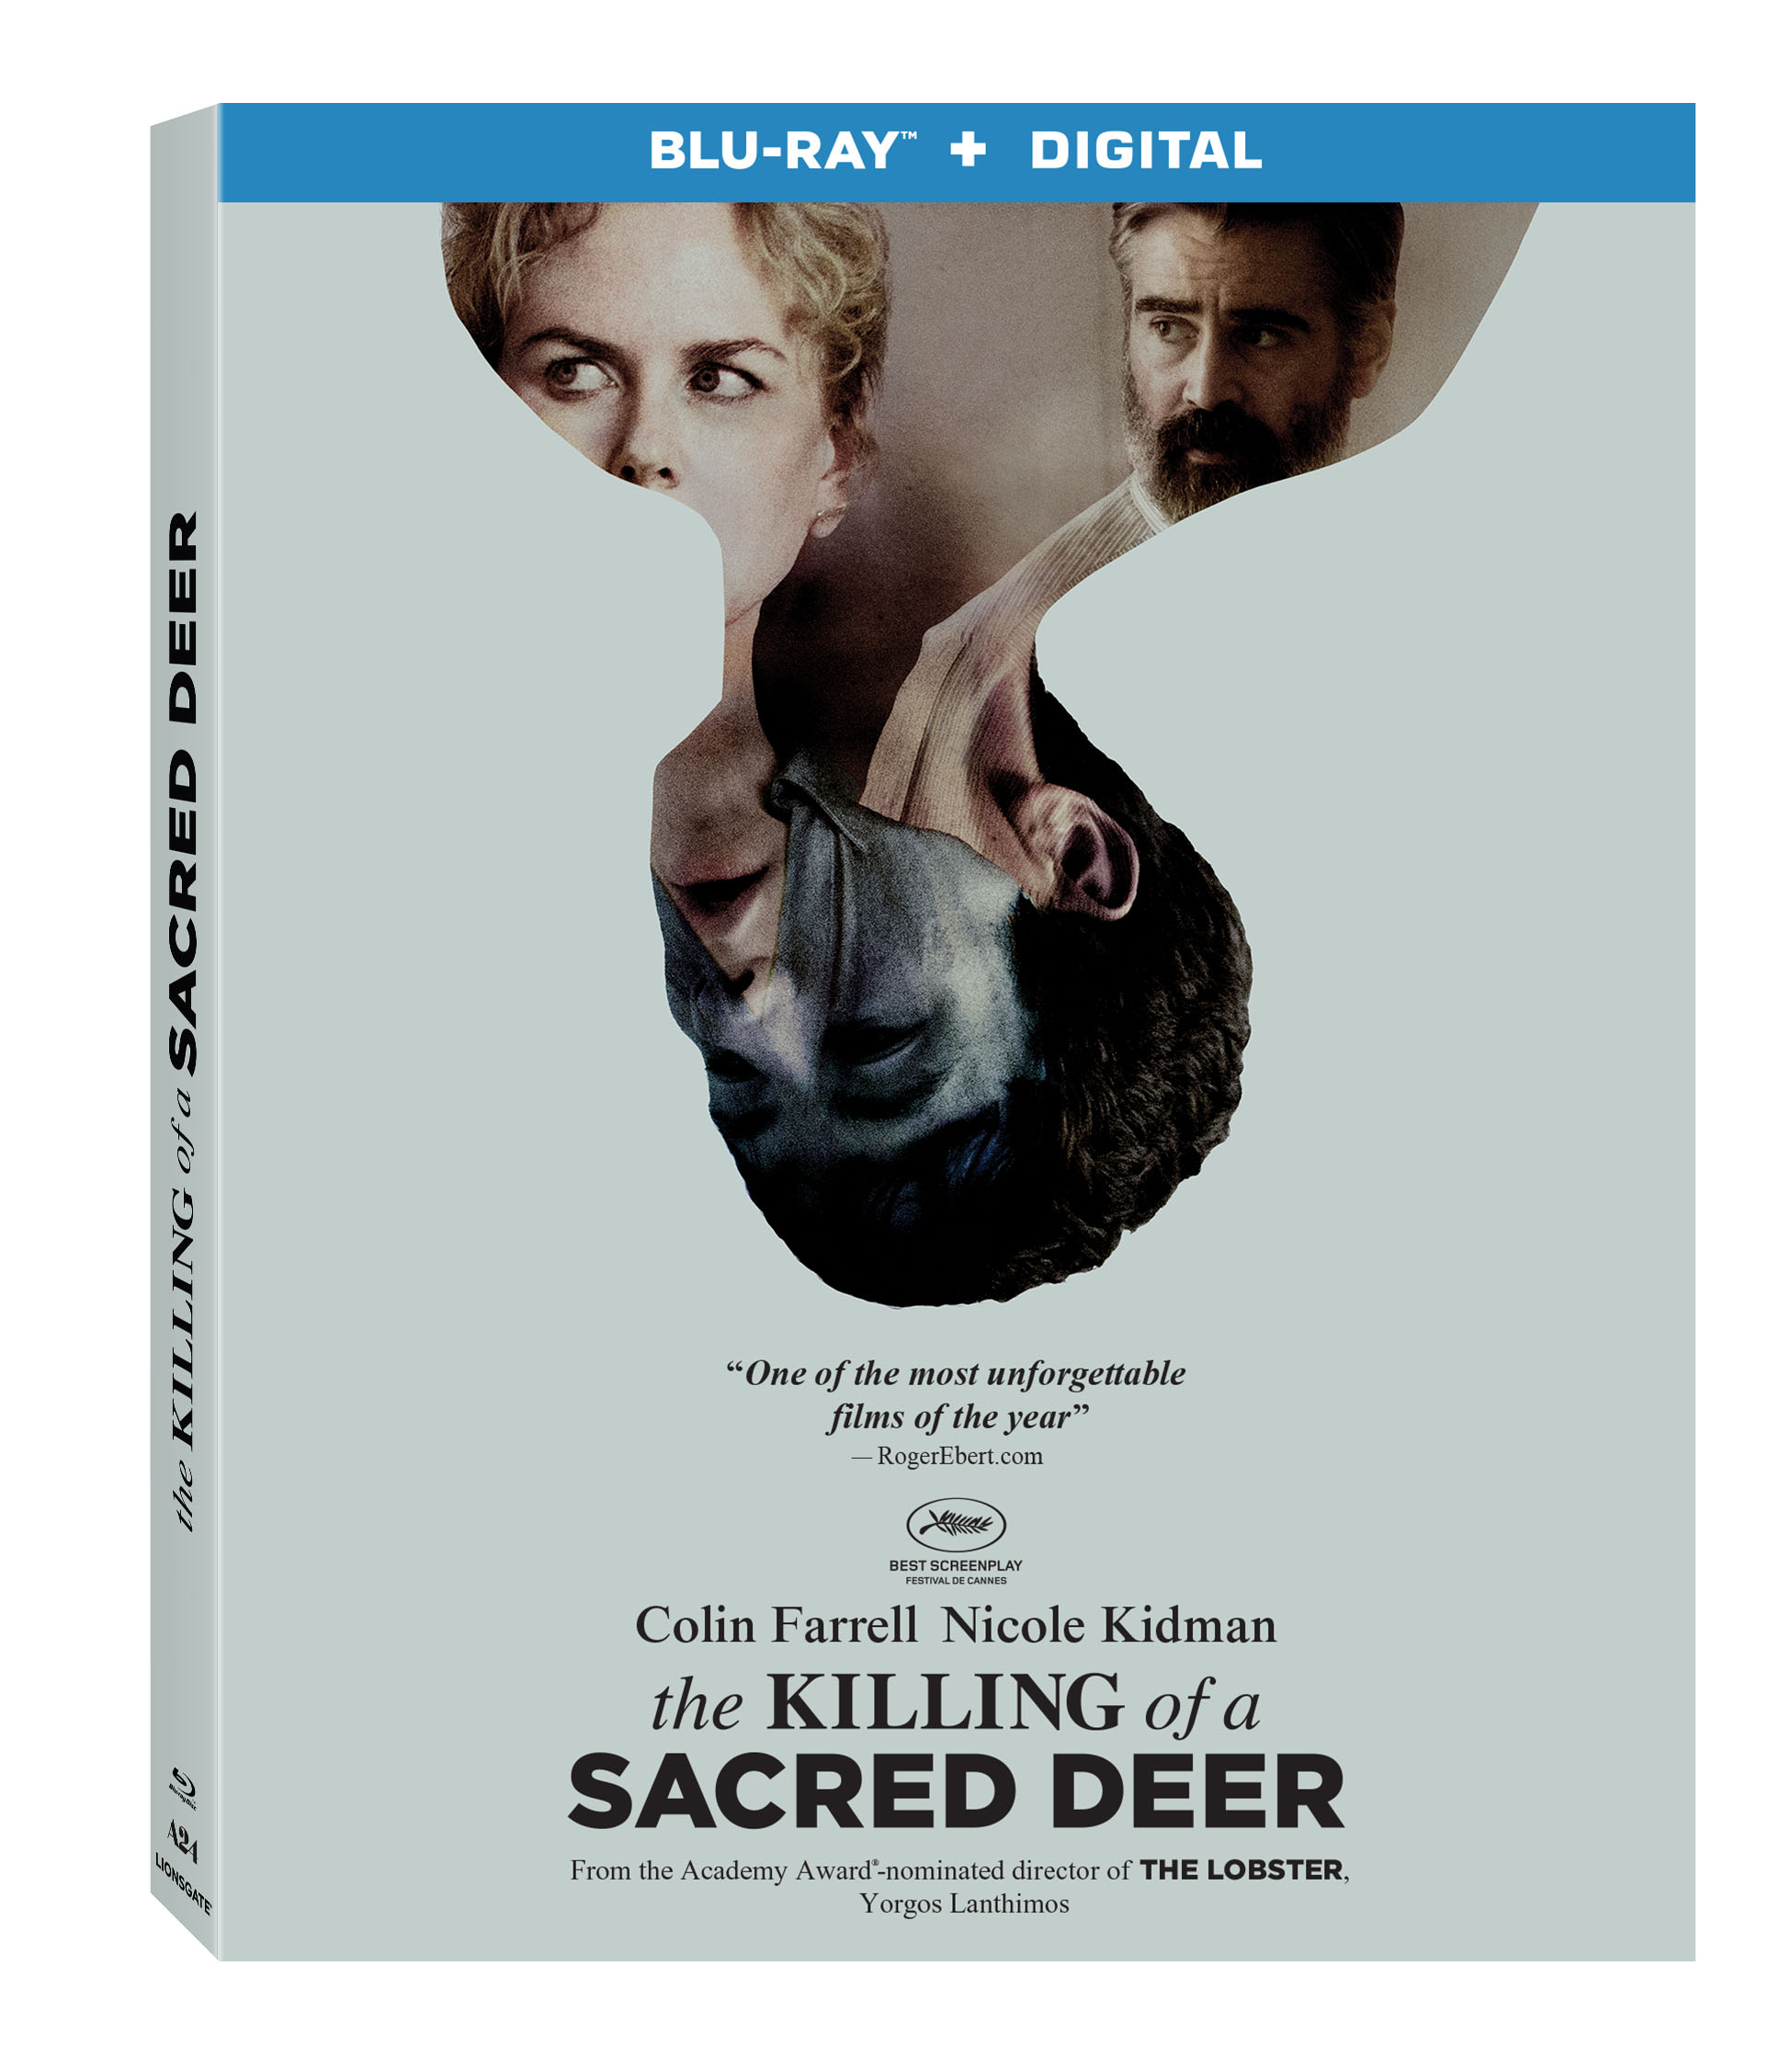 The Killing Of A Sacred Deer Blu-Ray Combo (Lionsgate Home Entertainment)